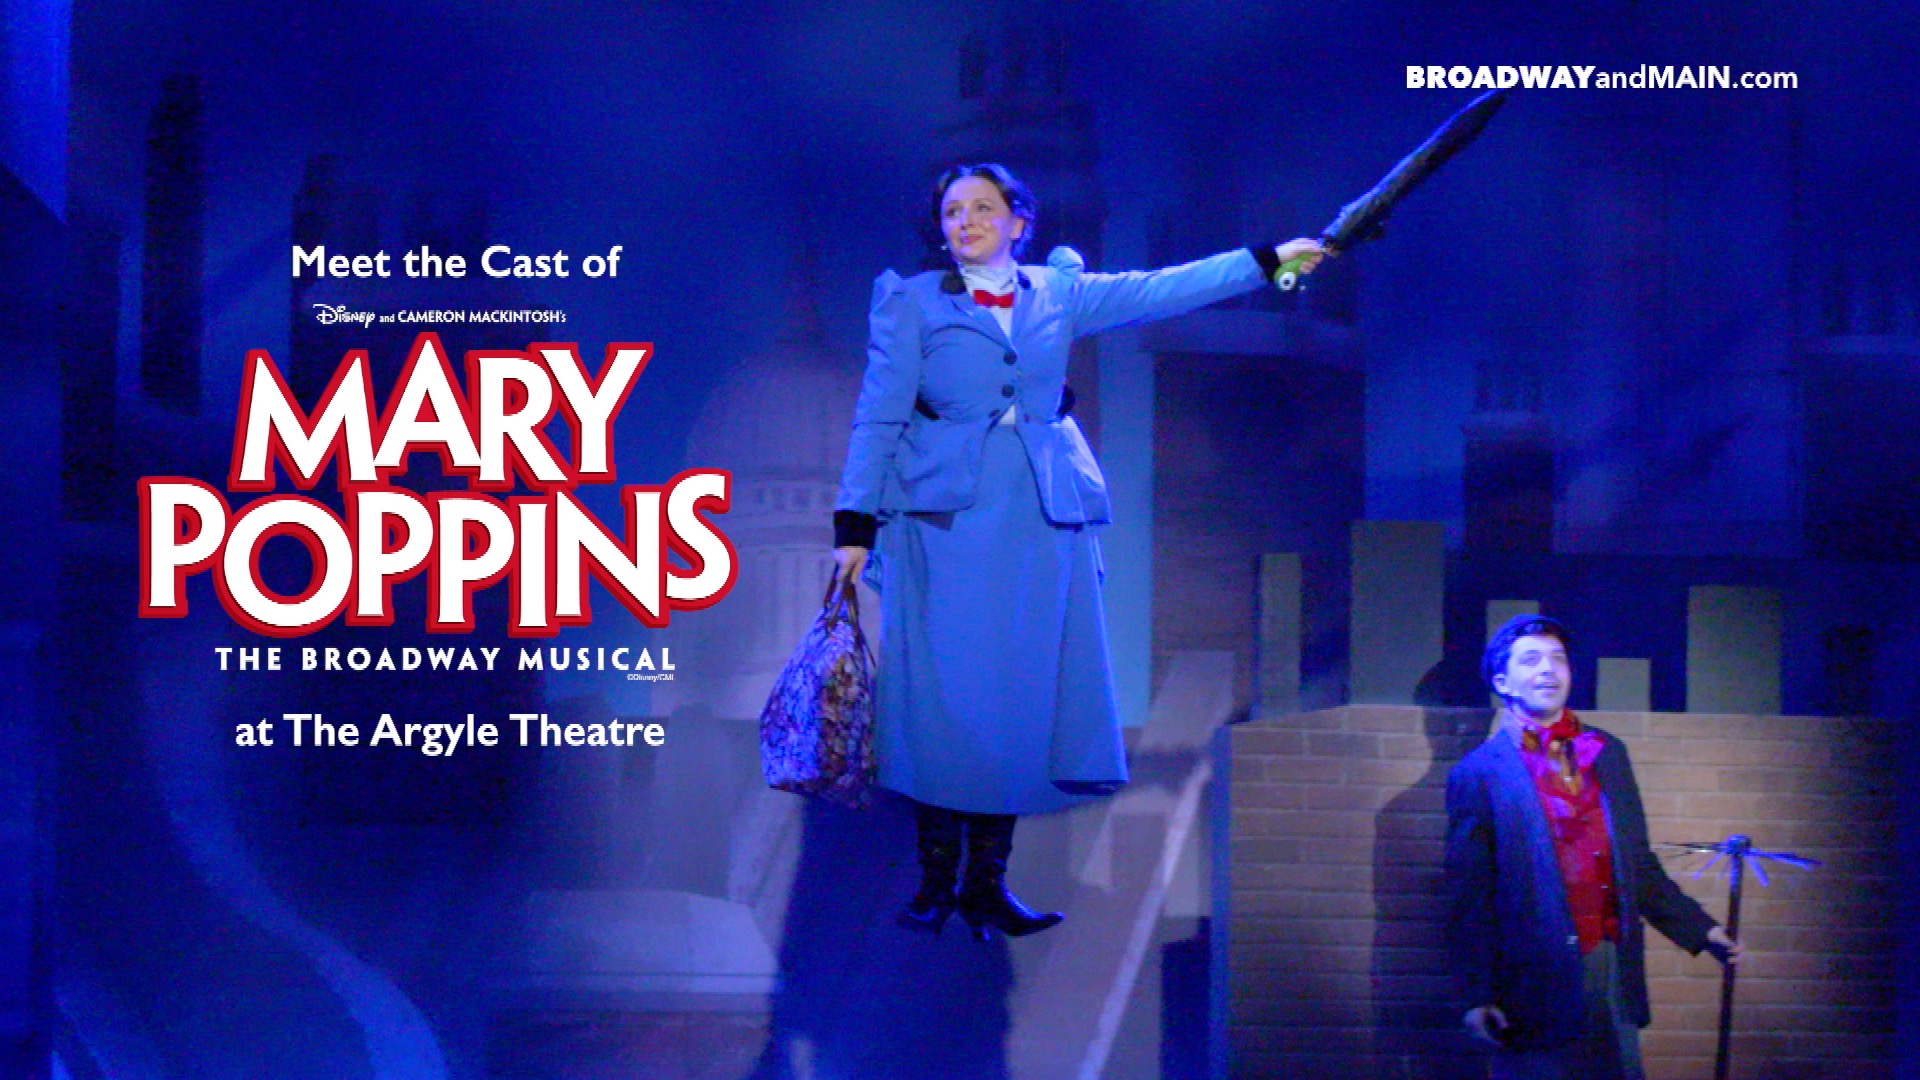 Meet The Cast of Mary Poppins at the Argyle Theatre